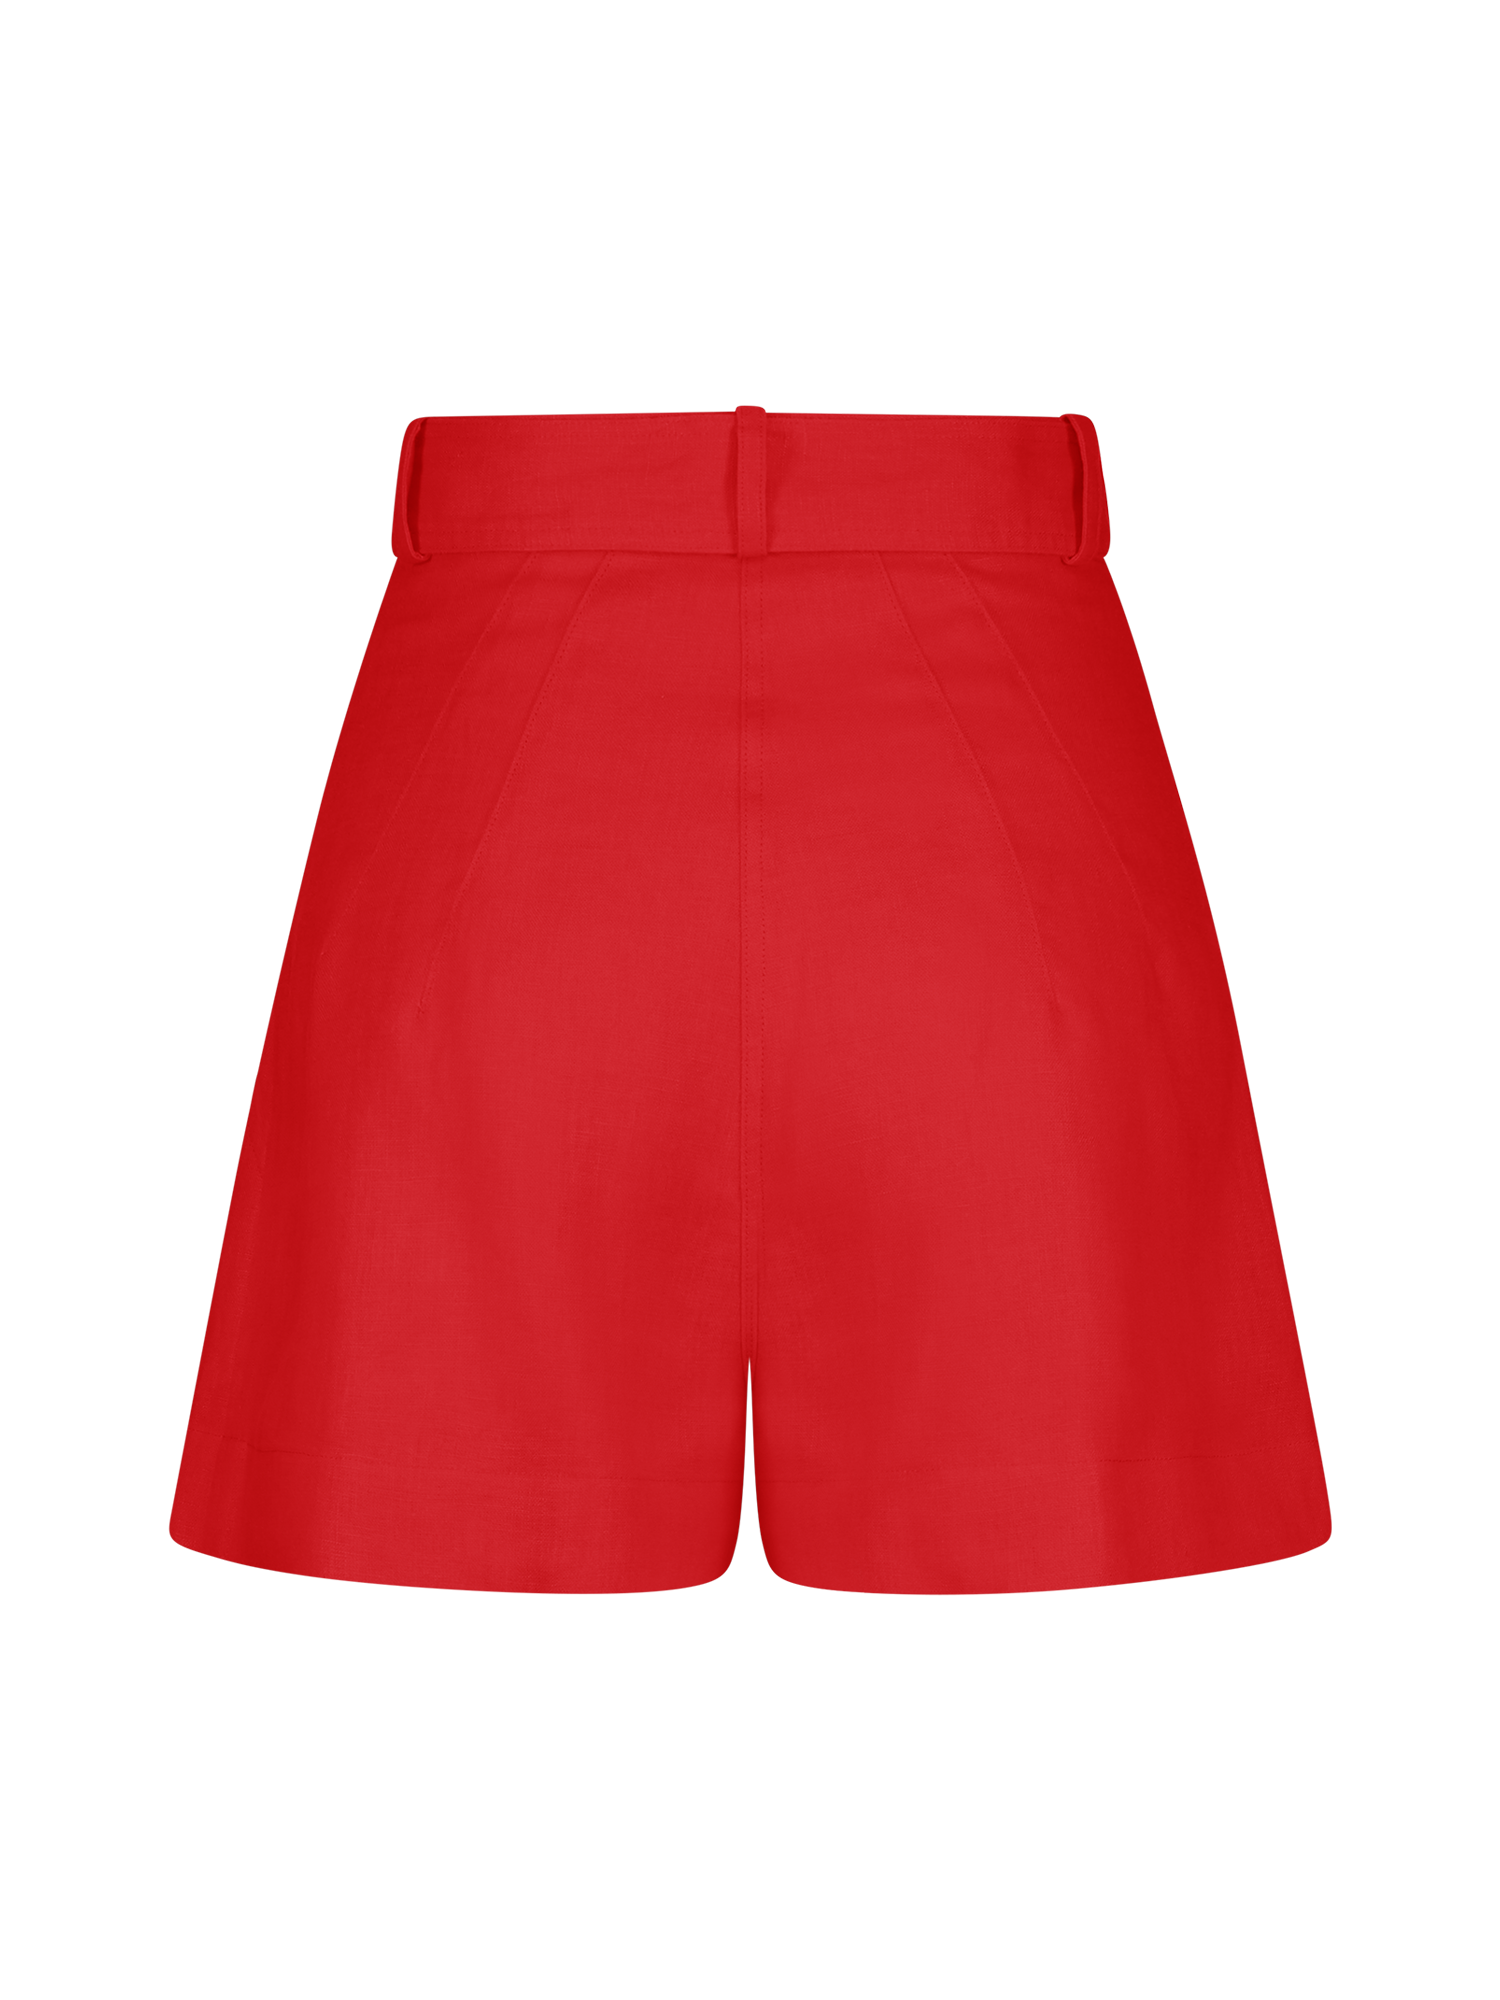 Pleated Red Linen Short